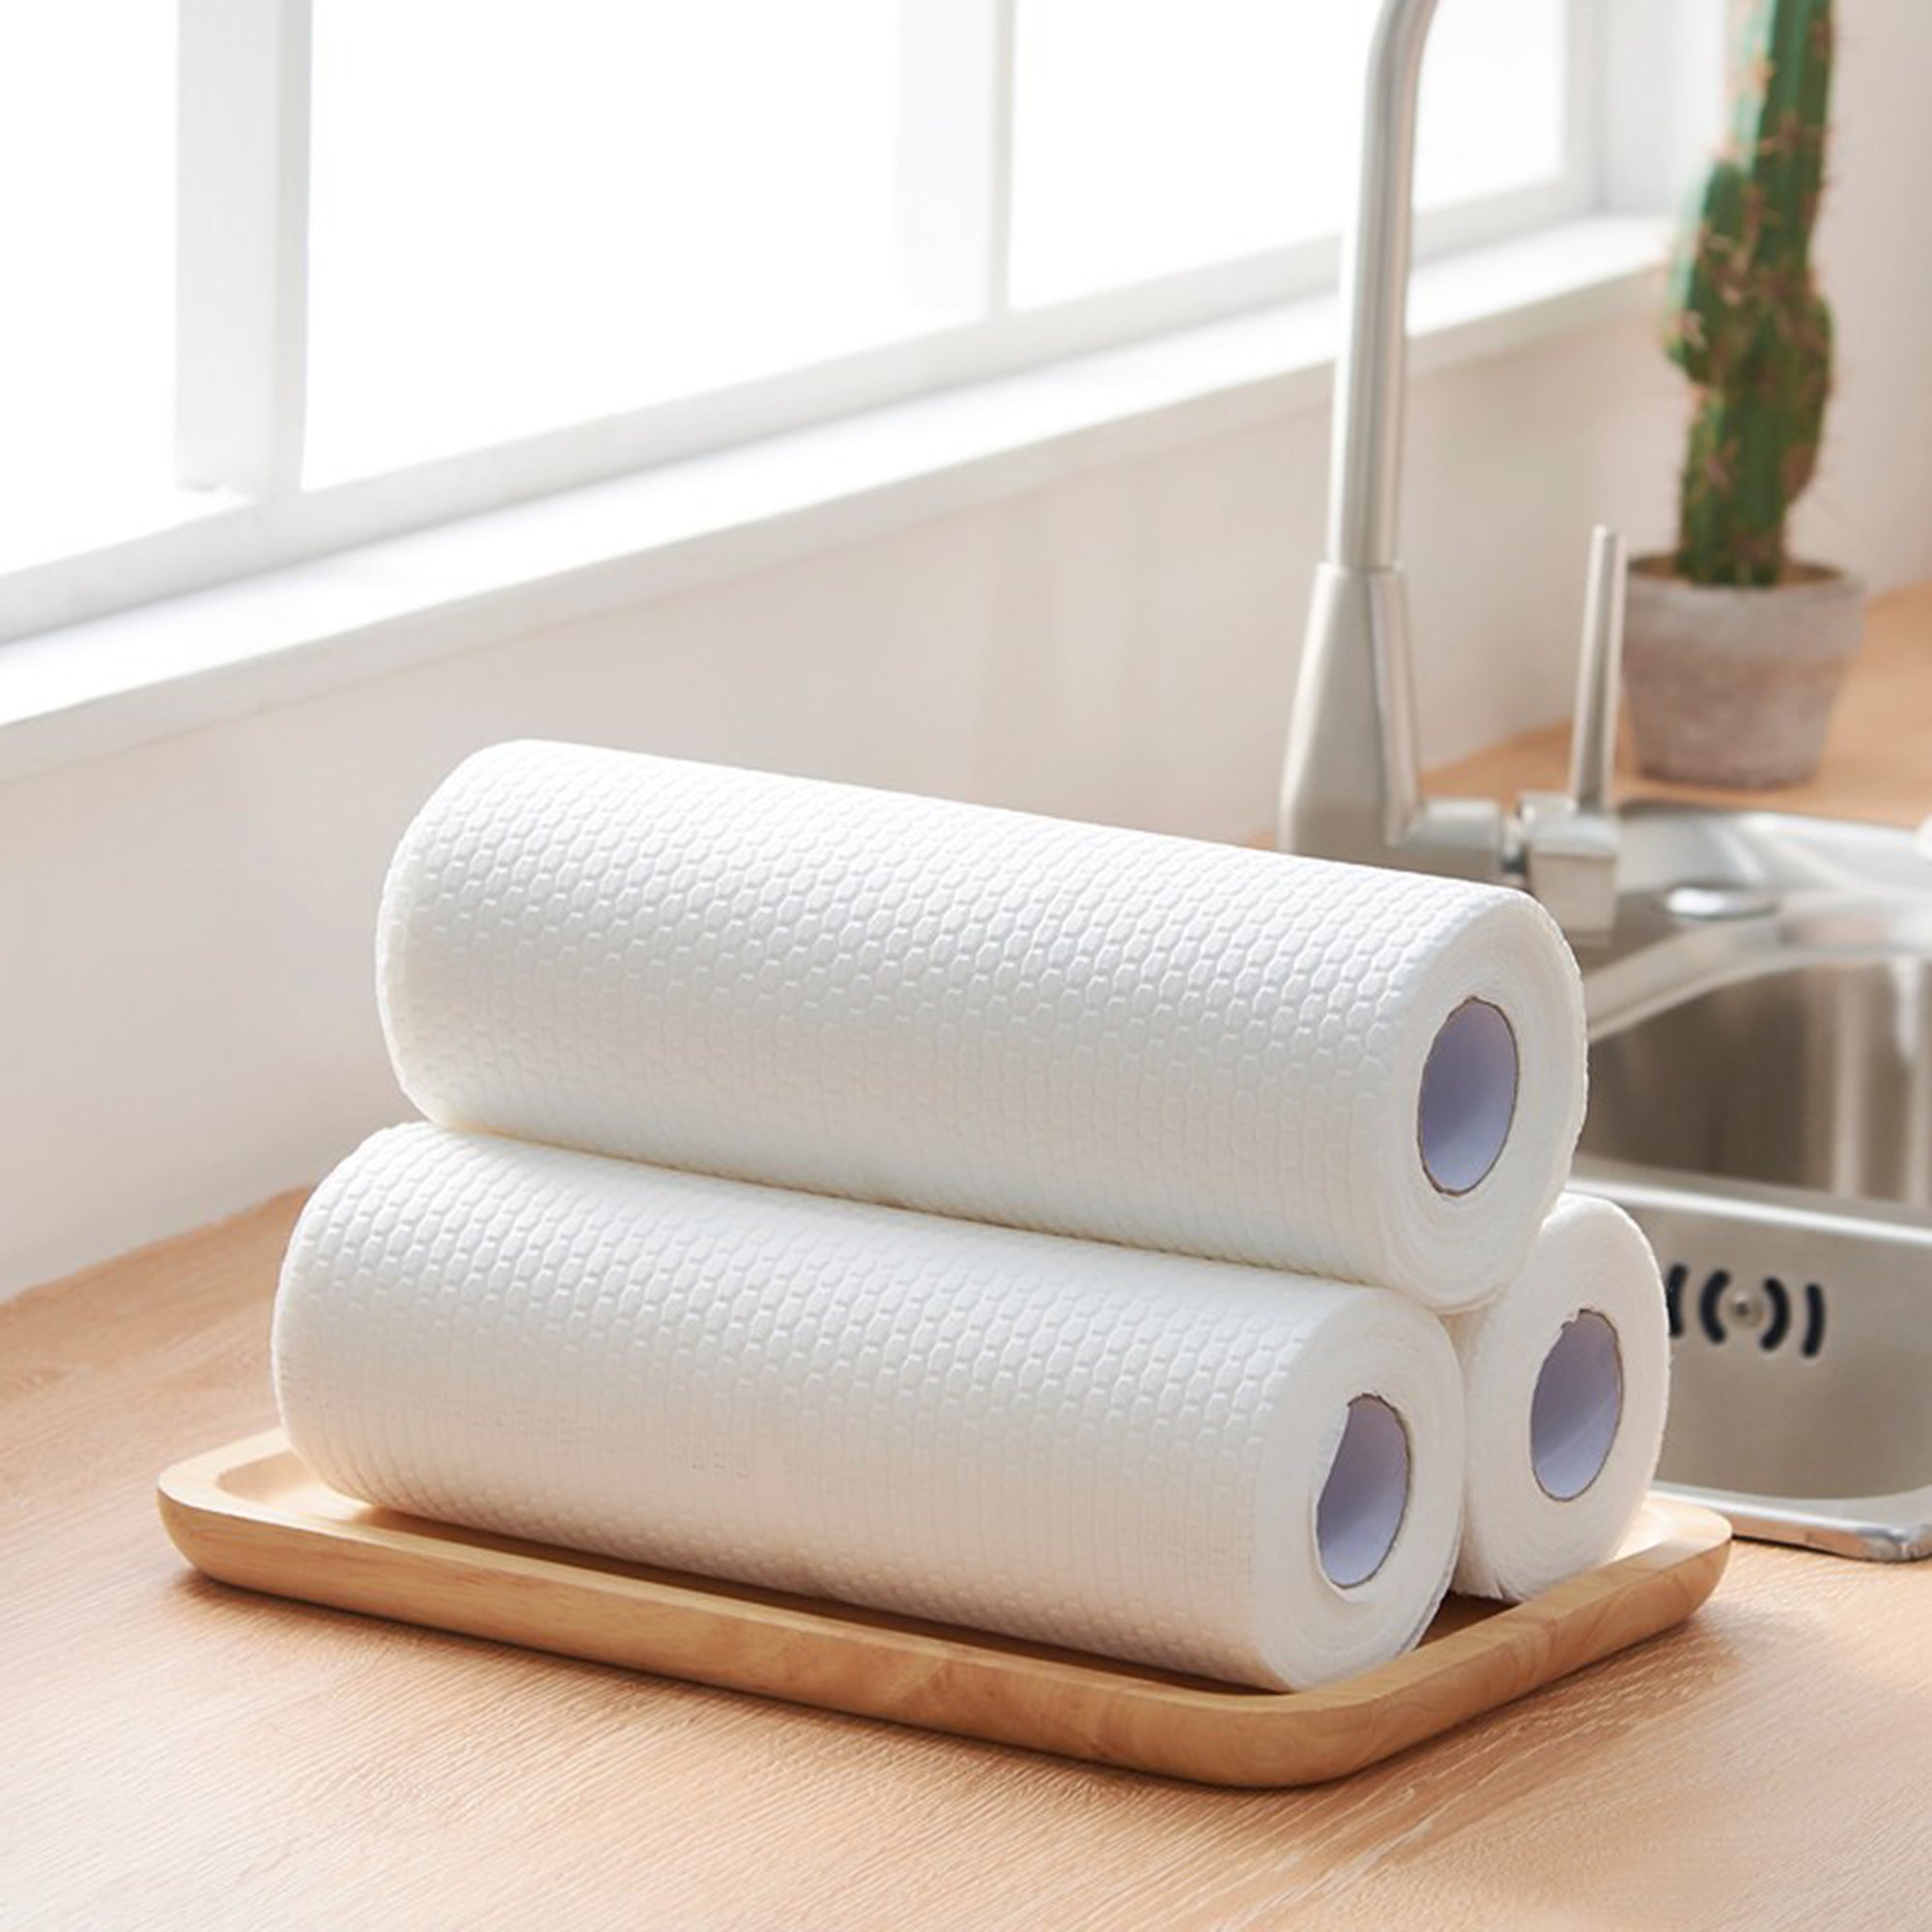 Catena Paper Towel Holder – Coming Soon